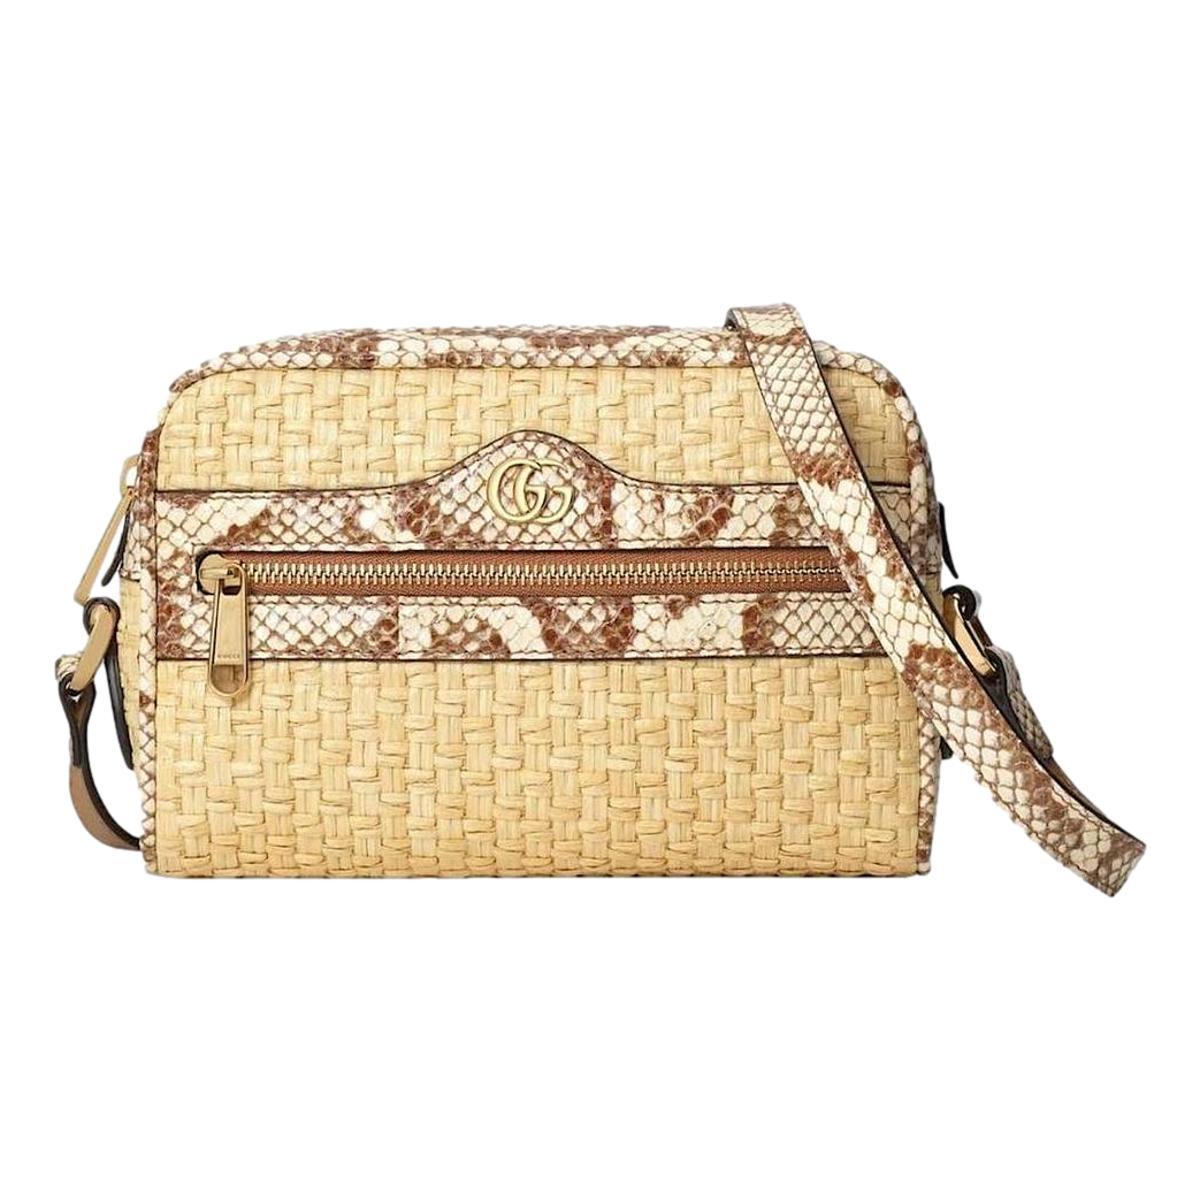 Gucci Ophidia Mini Bag Raffia Watersnake Shoulder Bag Beige 574493 at_Queen_Bee_of_Beverly_Hills